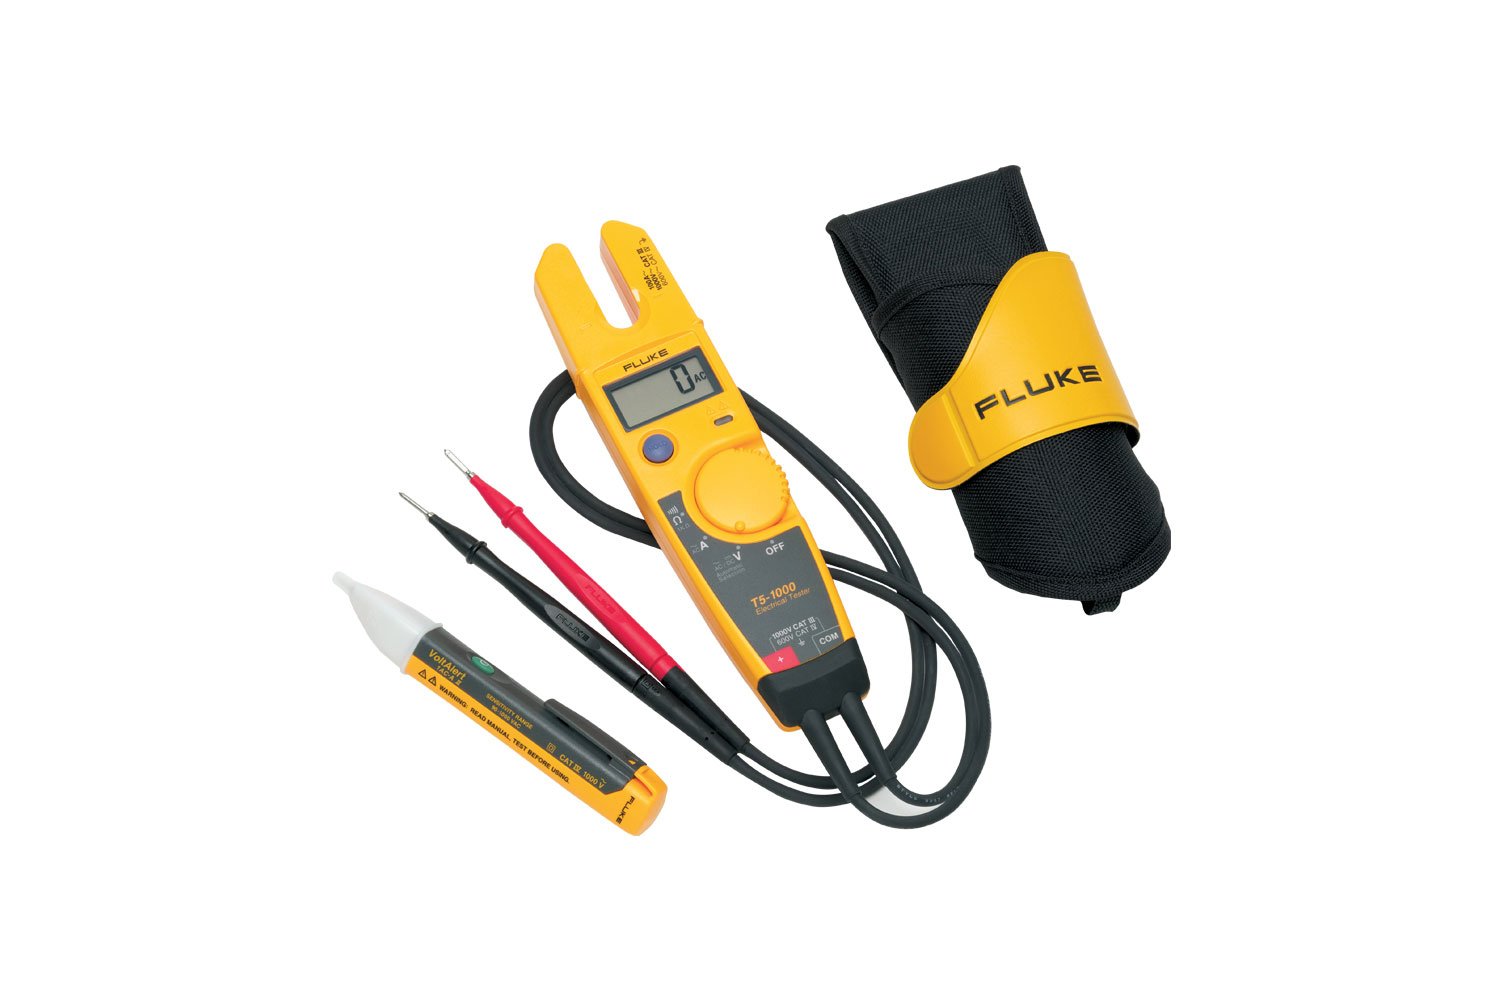 Continuity and Current Tester,Fluke T6-600,T6-1000 Electrical Tester RLSOCO Carrying Case for Fluke T5-1000/Fluke T5-600 Electrical Voltage 